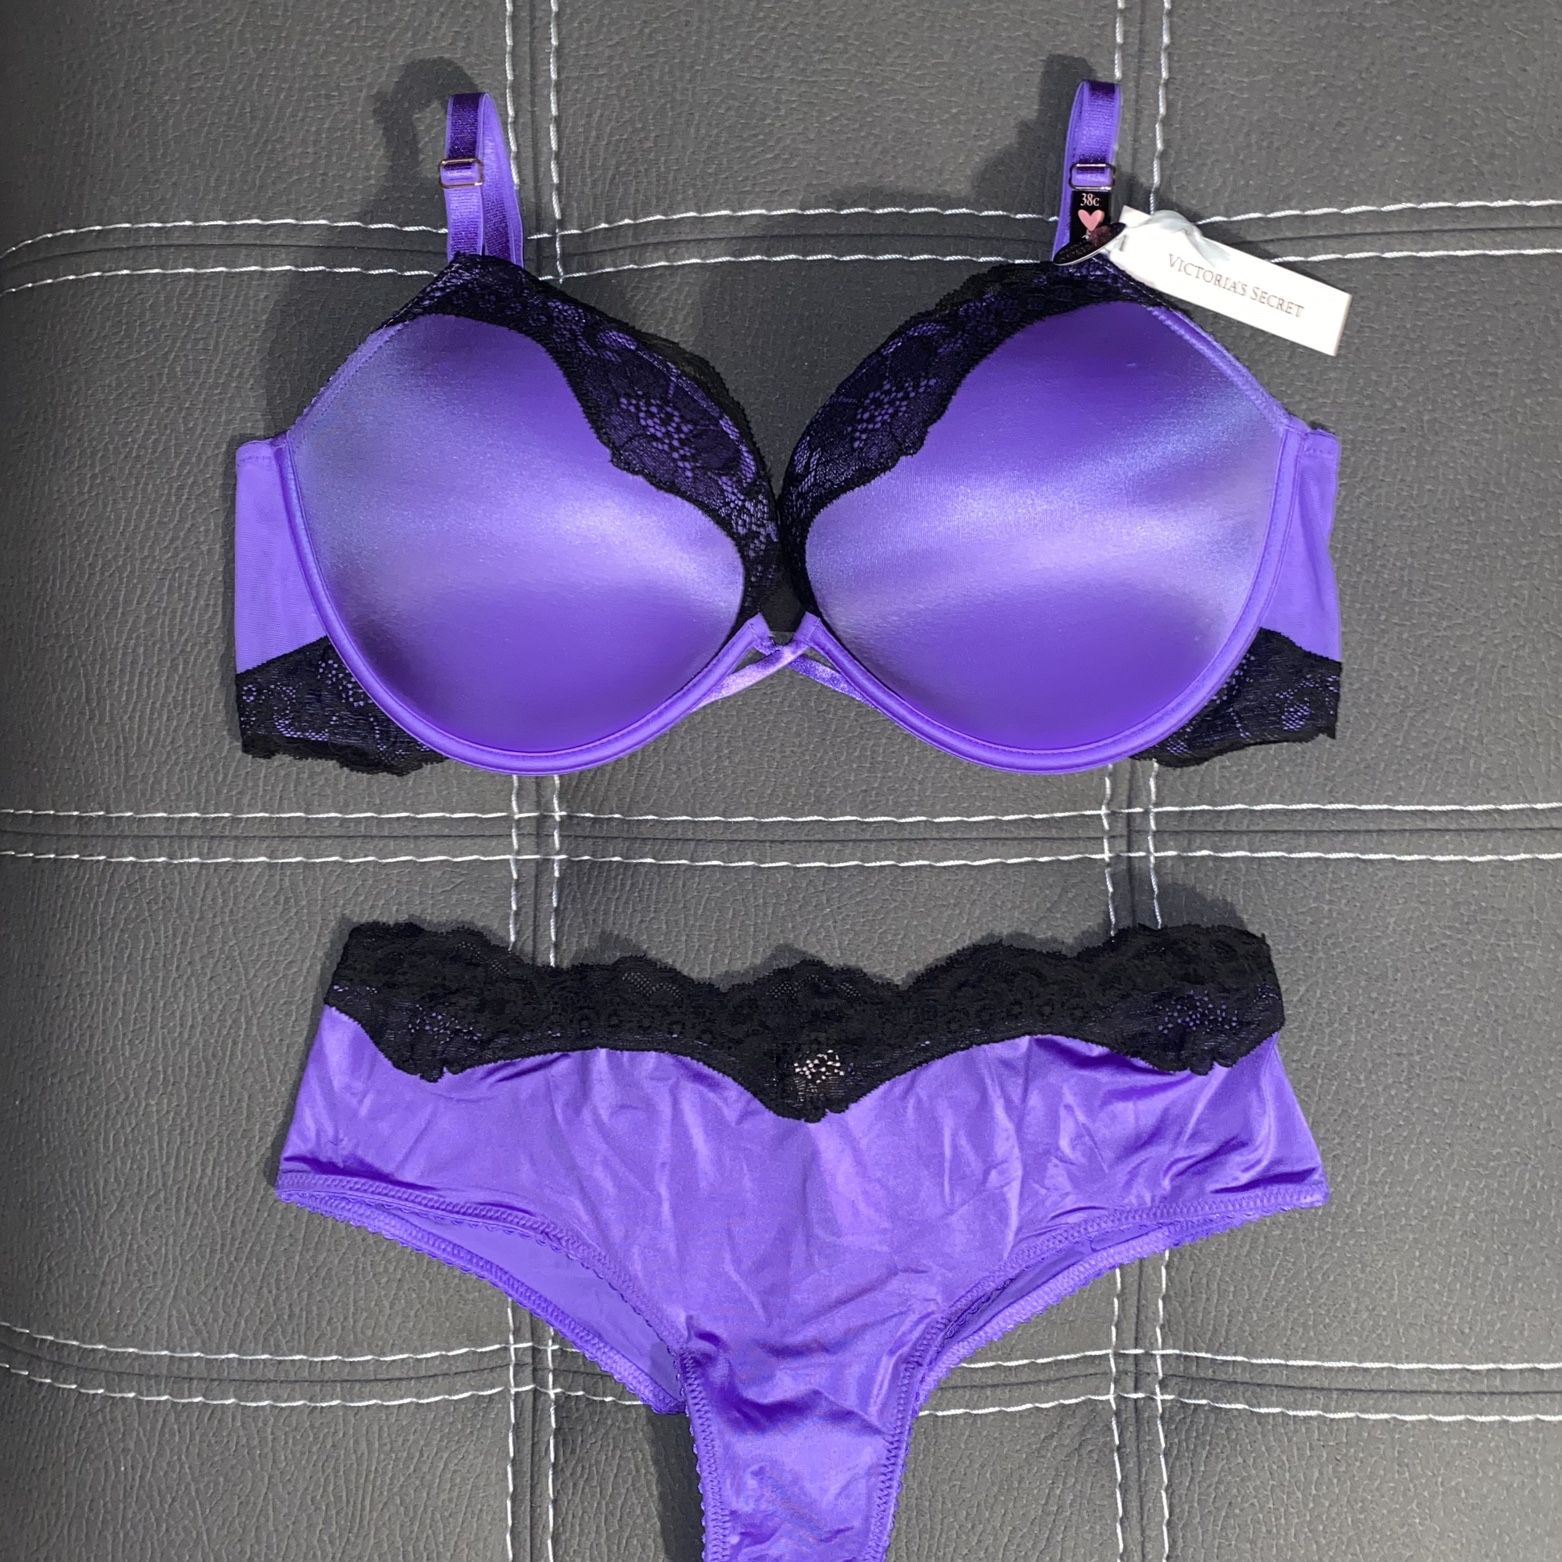 New Victoria Secret Bra Set 38C Bombshell And cheeky Panties Medium Satin  +2Cups for Sale in Tucson, AZ - OfferUp